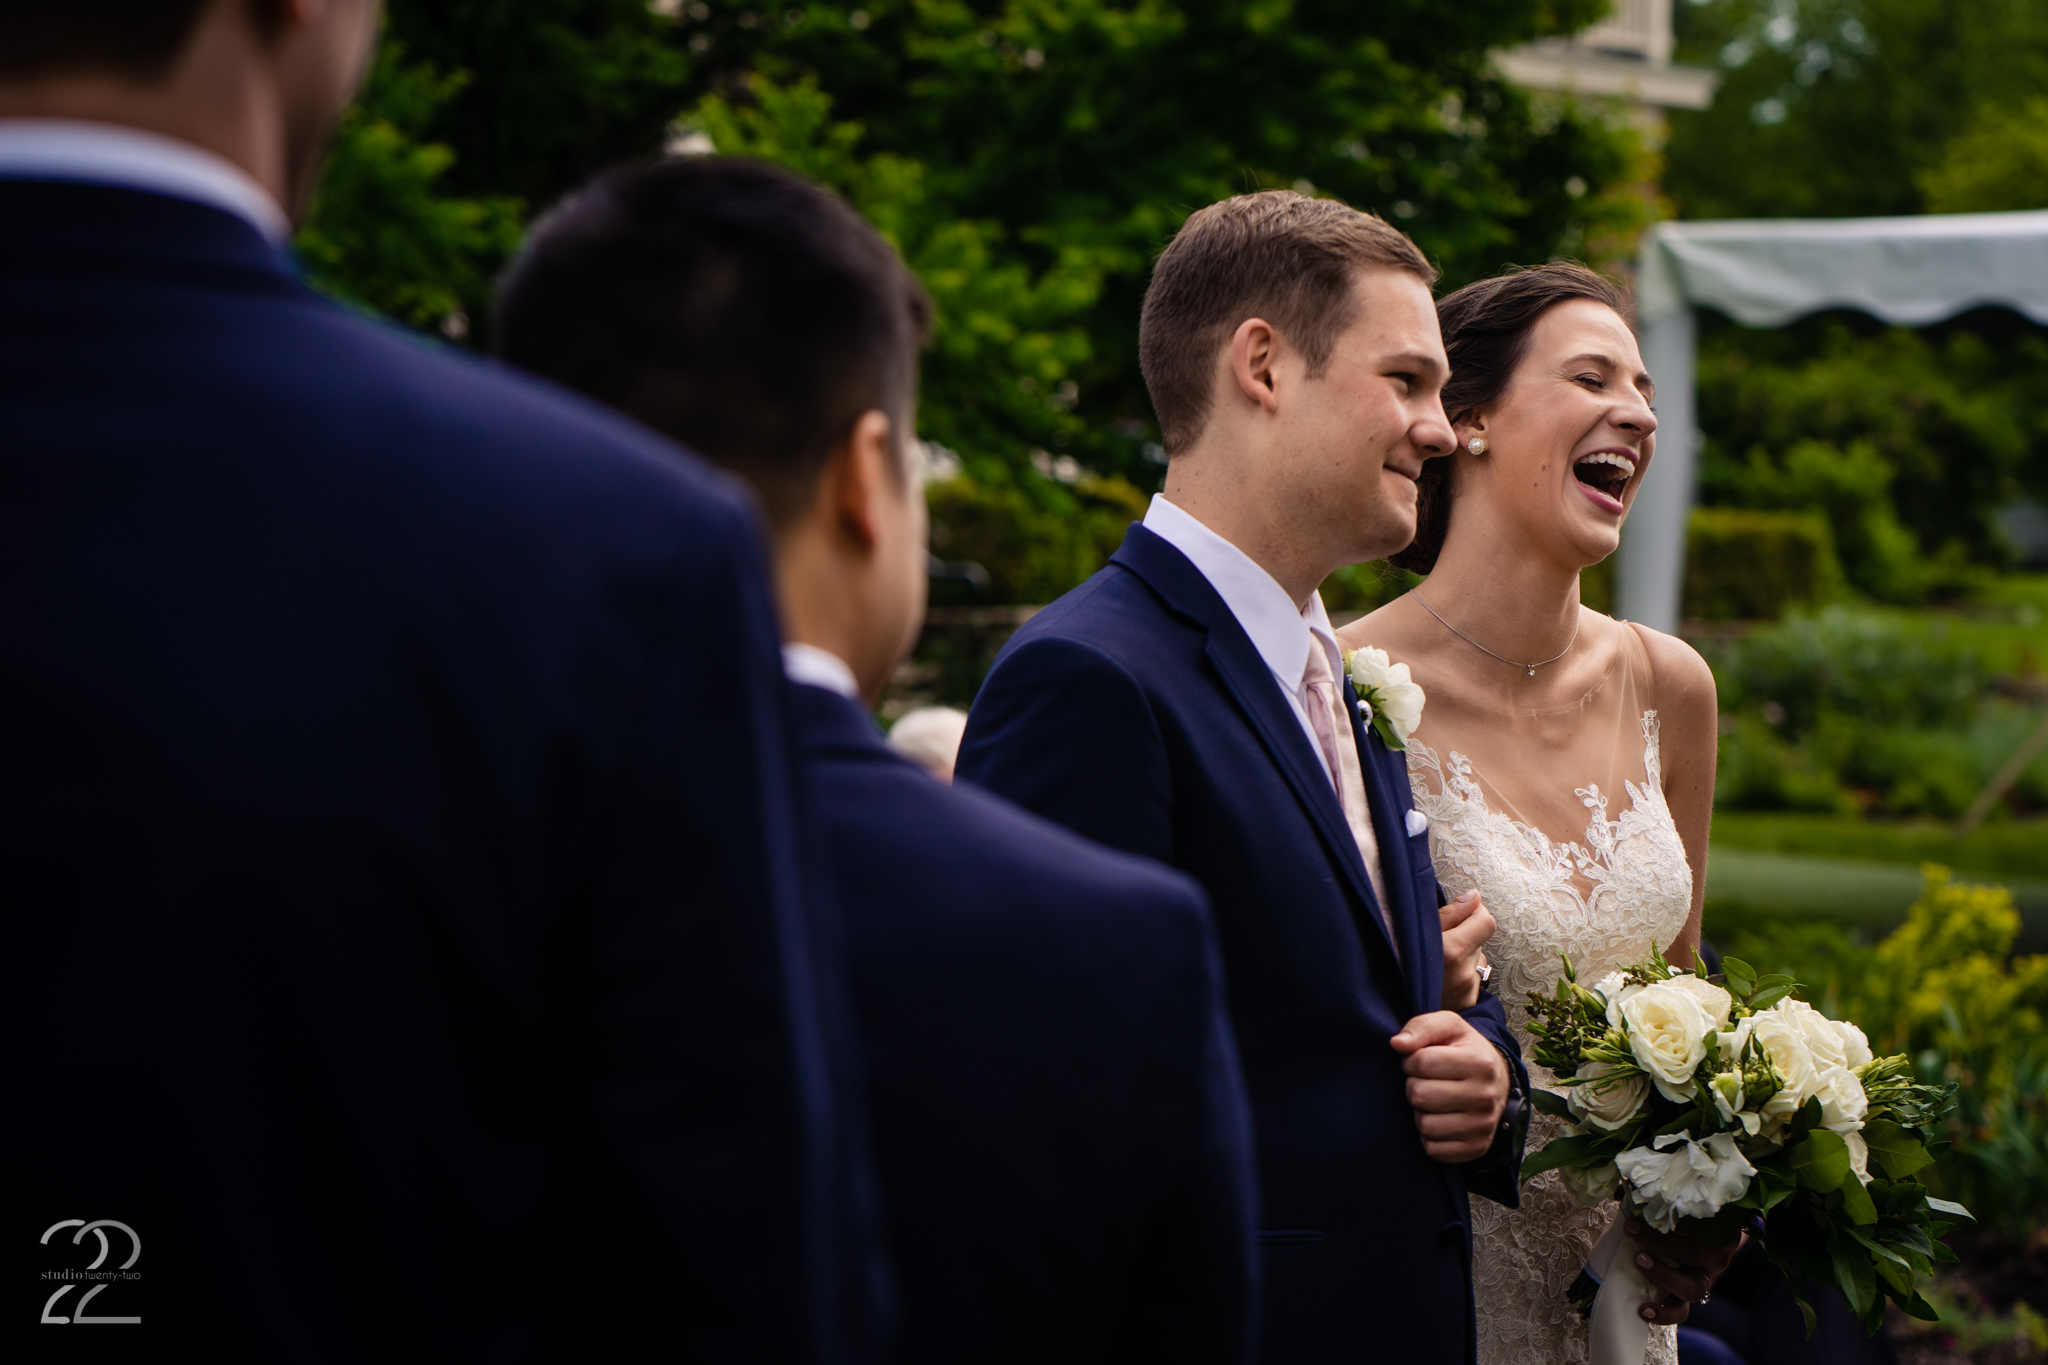  The happiest moment of the day, when you are announced as finally married! Studio 22 wants that moment to be felt by you, over and over each time you look at your wedding photographs. 